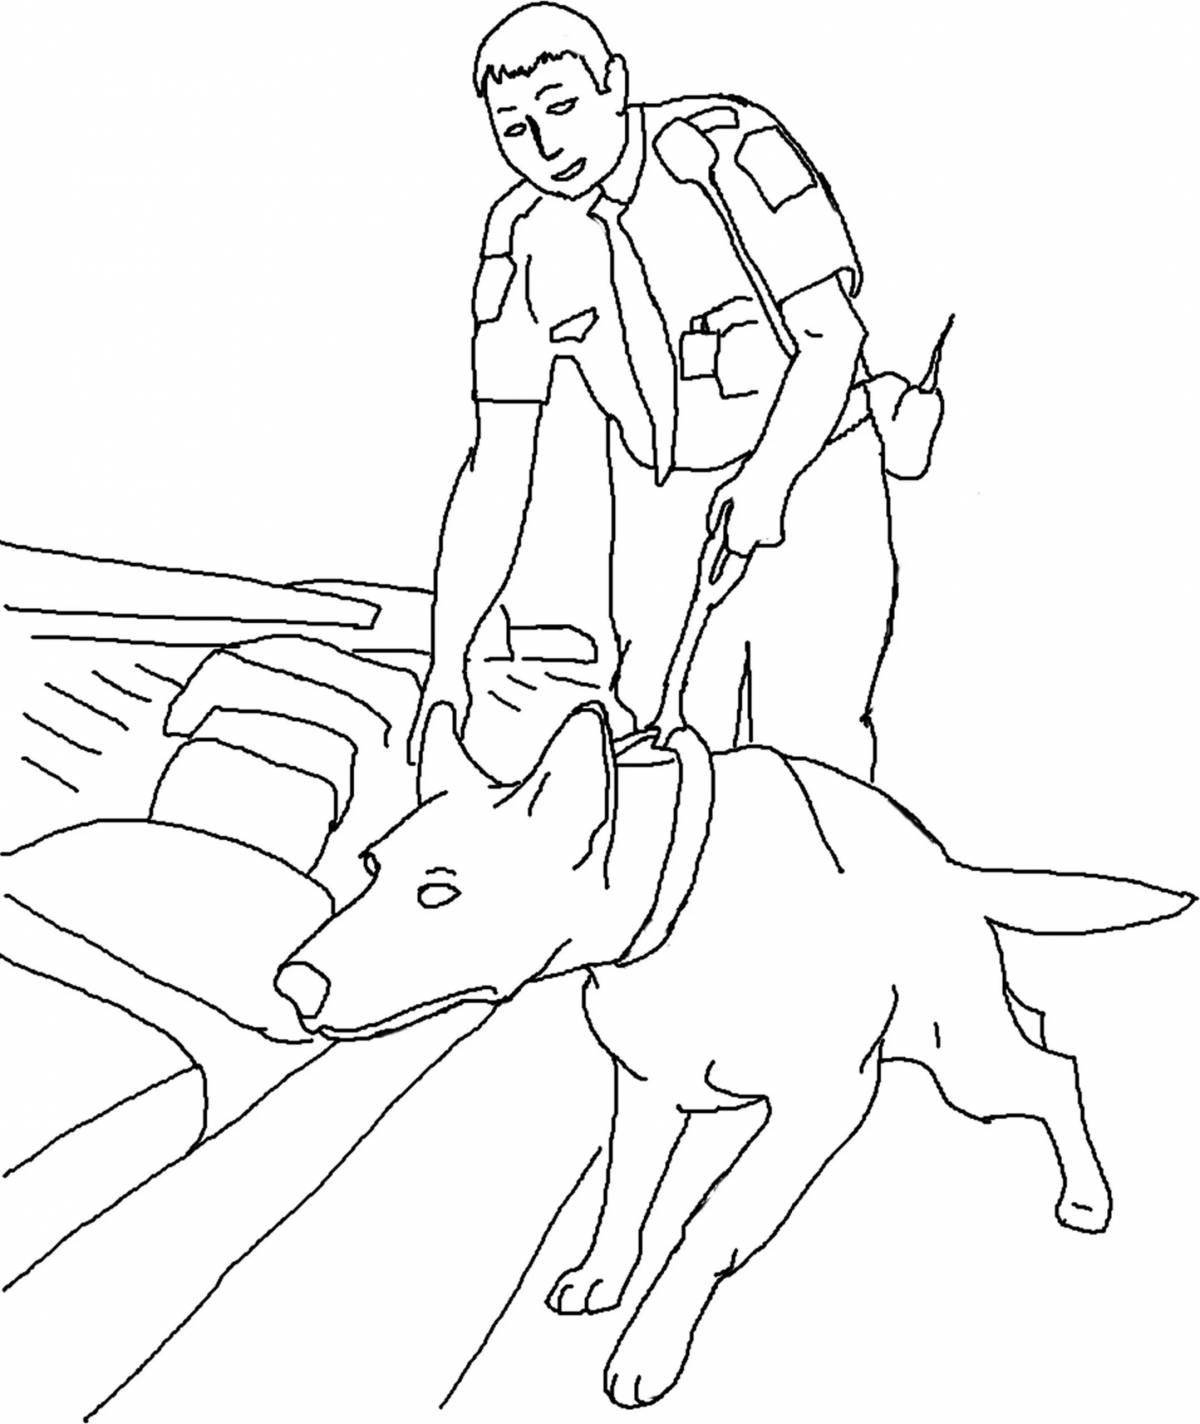 Attracting a border guard with a dog for children